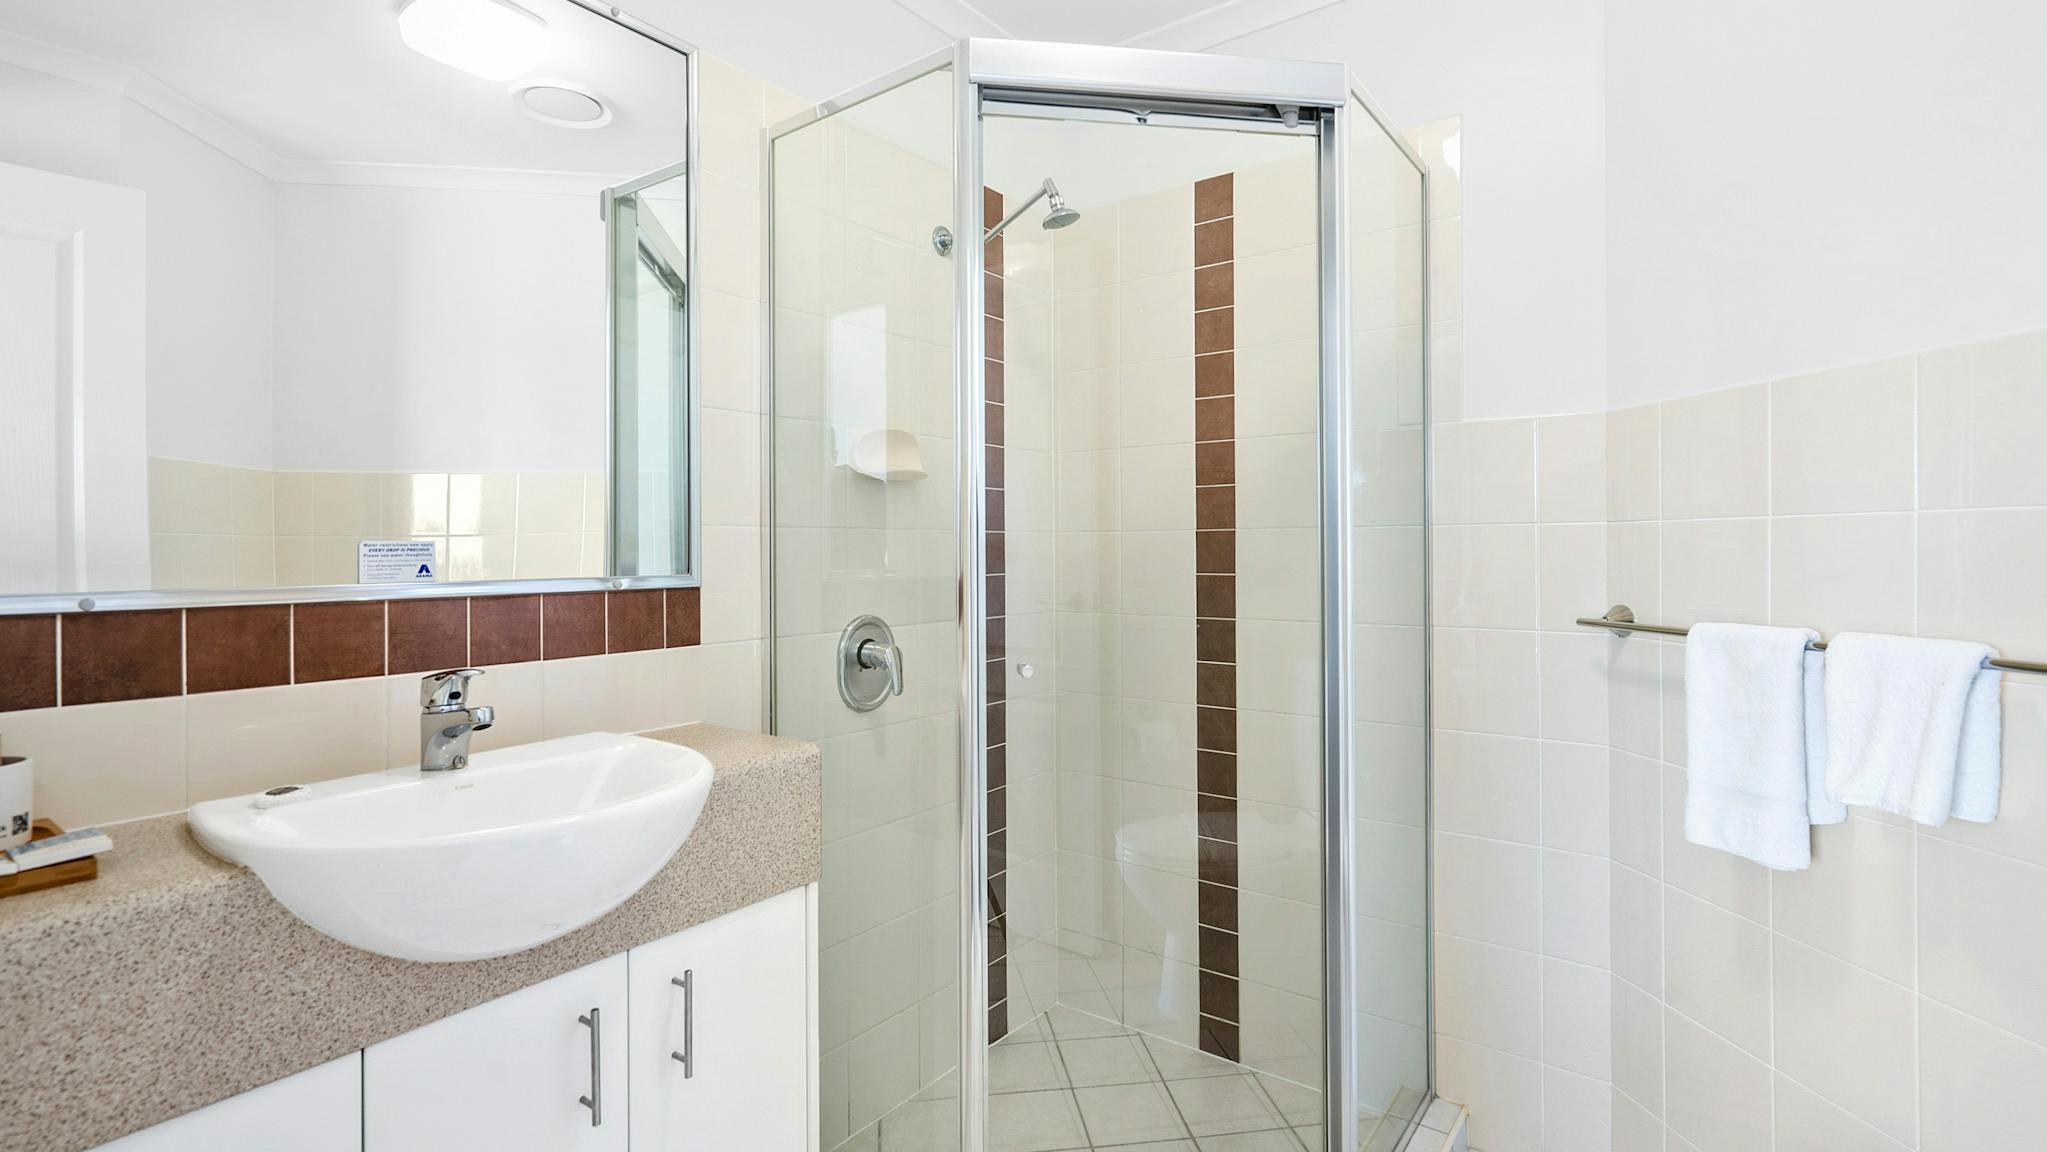 Studios and Master's all have walk-in showers in their configuration